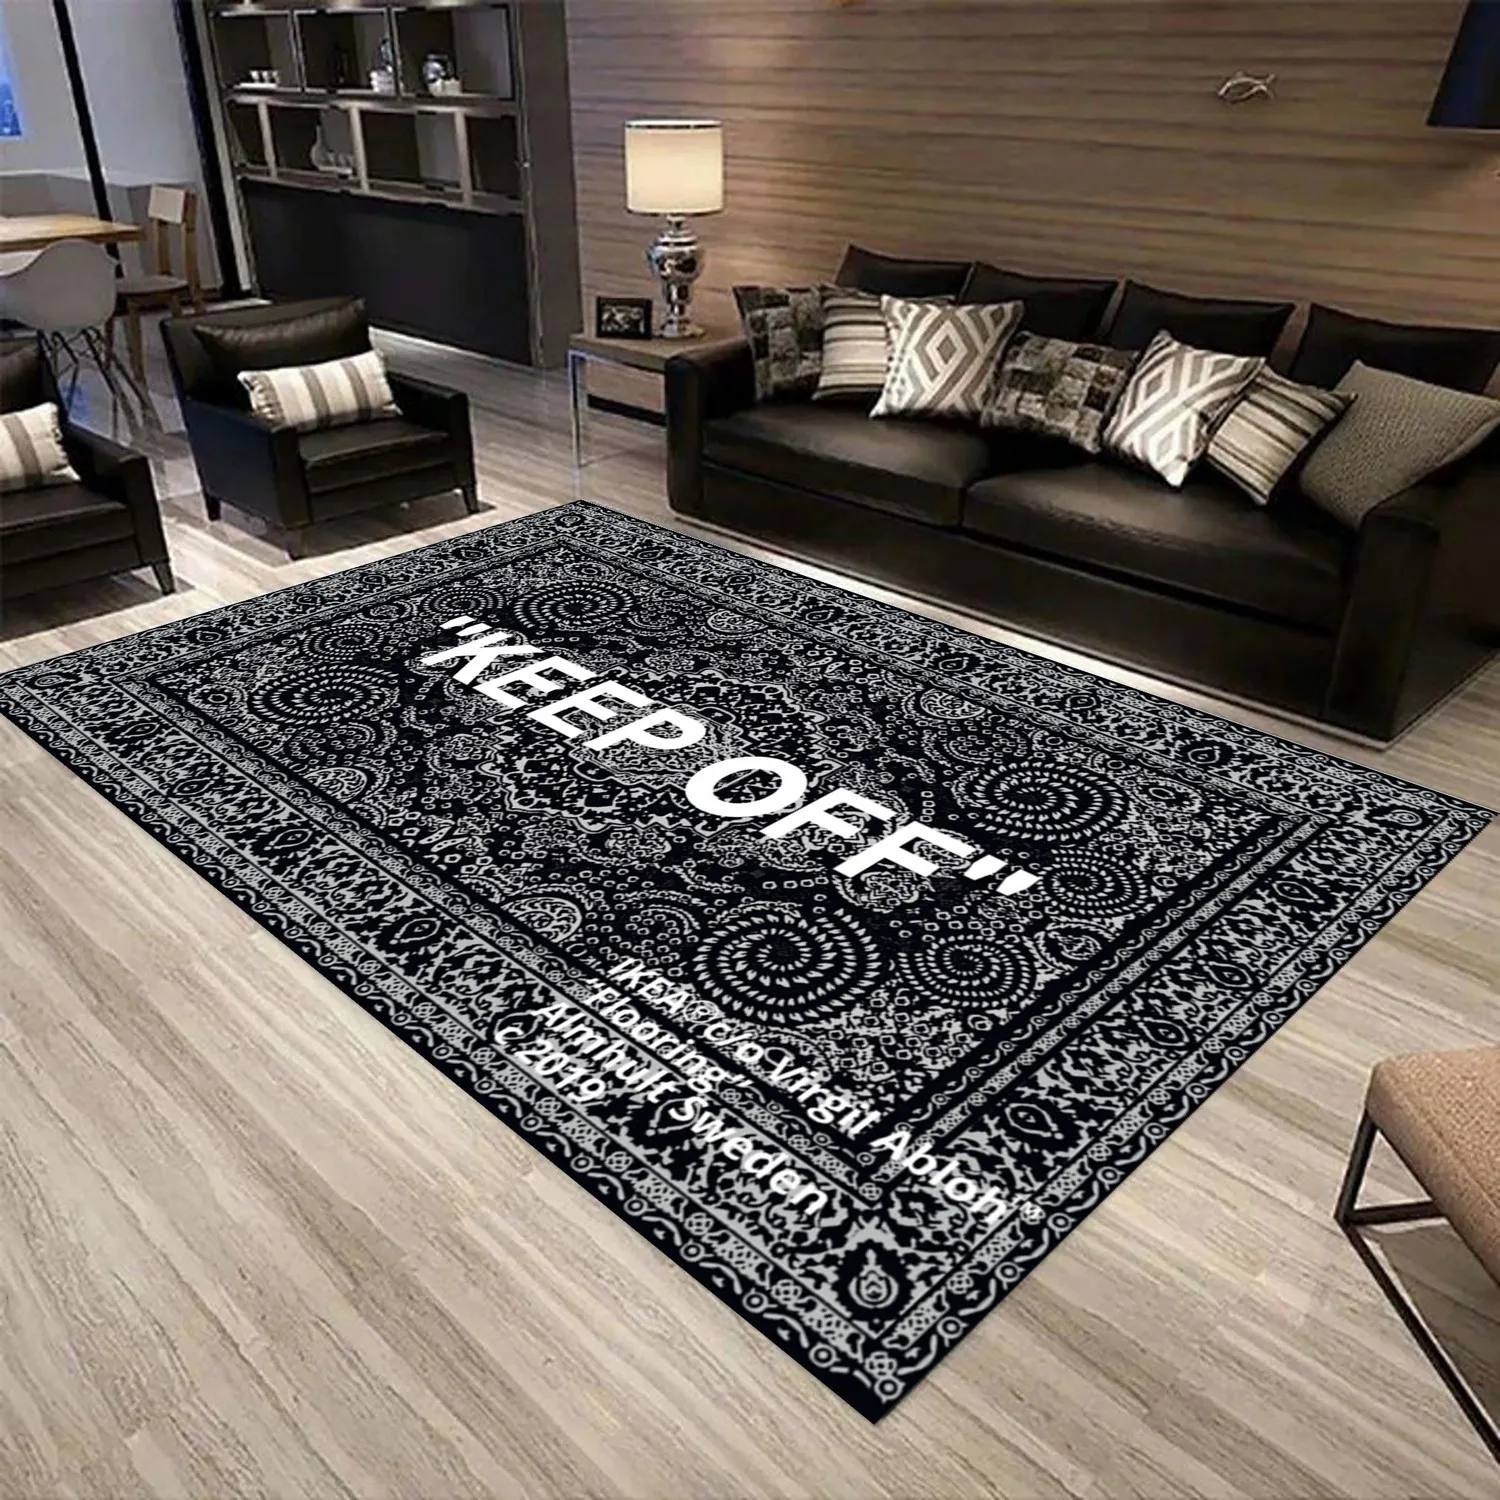 

Keep off Rug, Keepoff Classic, Virgil Abloh Rugs, Off White Pattern Rug, Rugs Living Room, Washable Rugs For New Life Styles